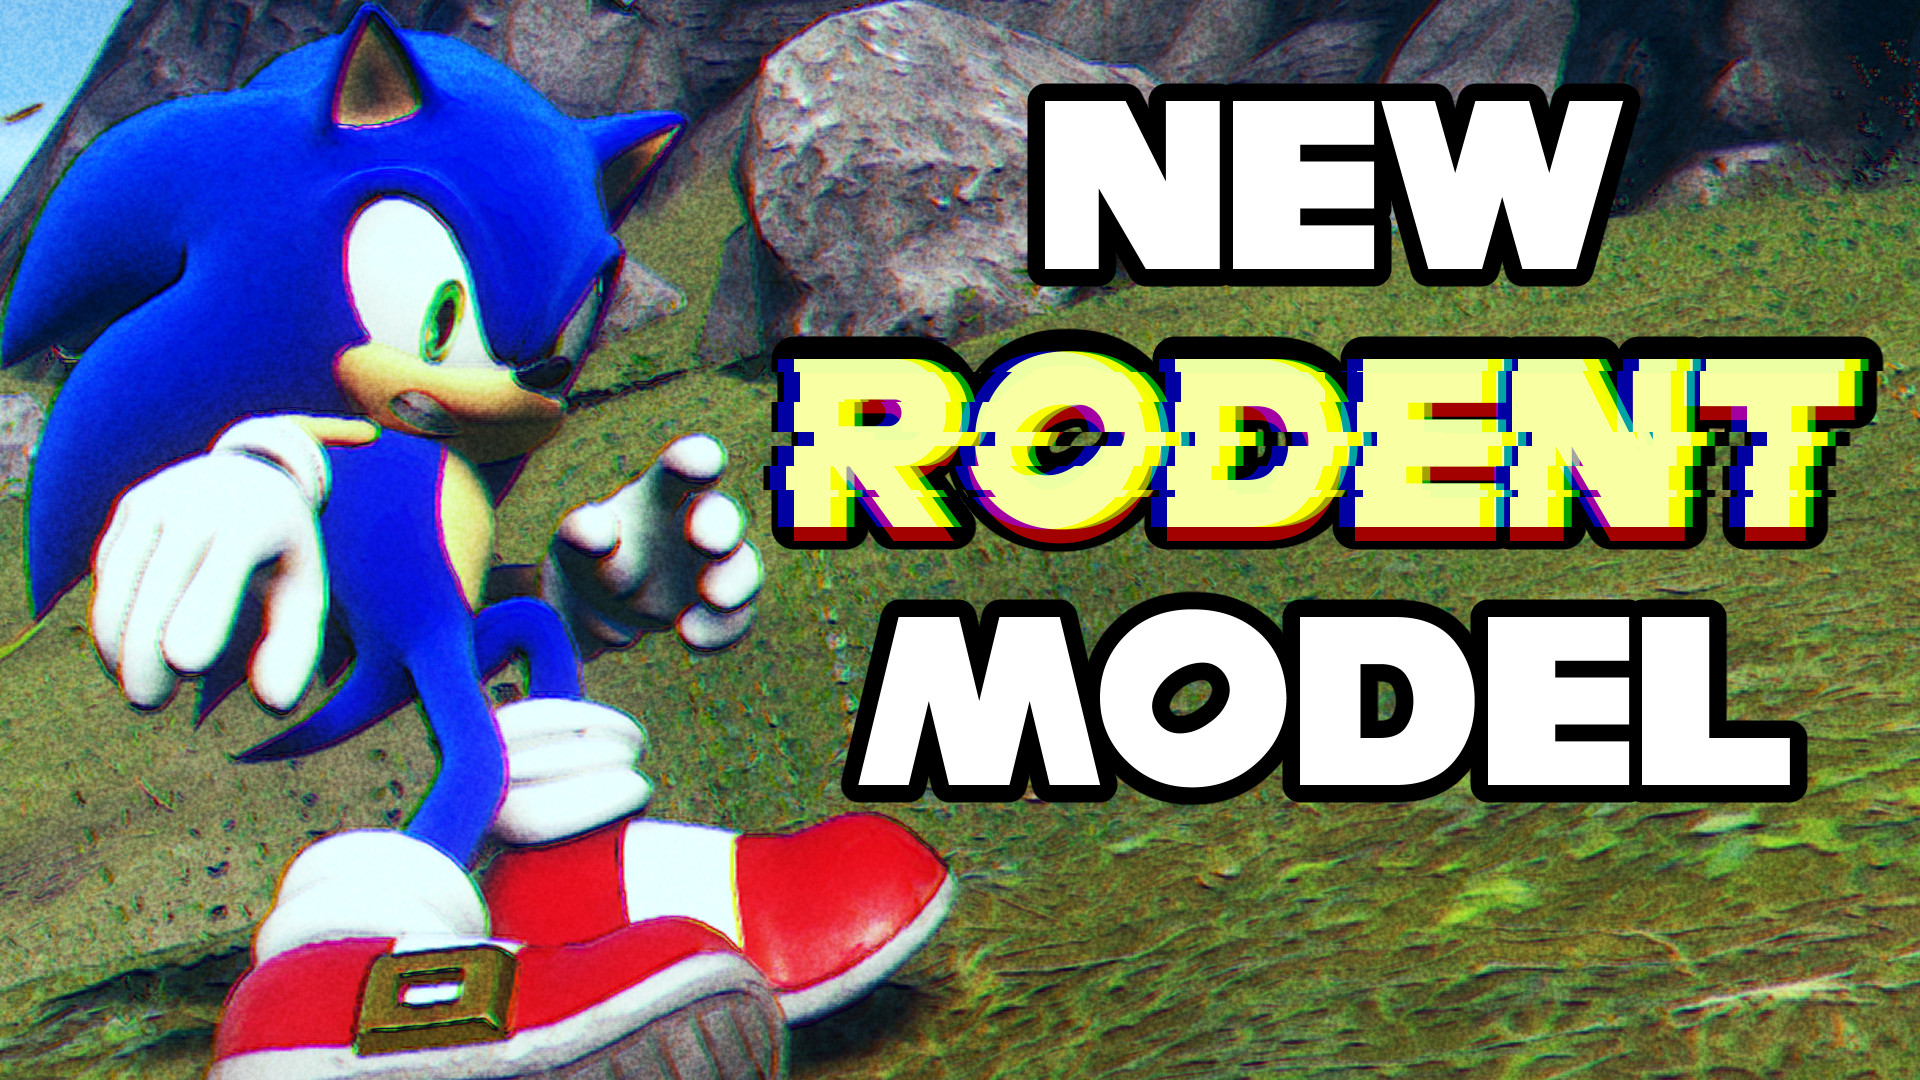 Someone Has Finally Modded Shadow Into Sonic Frontiers